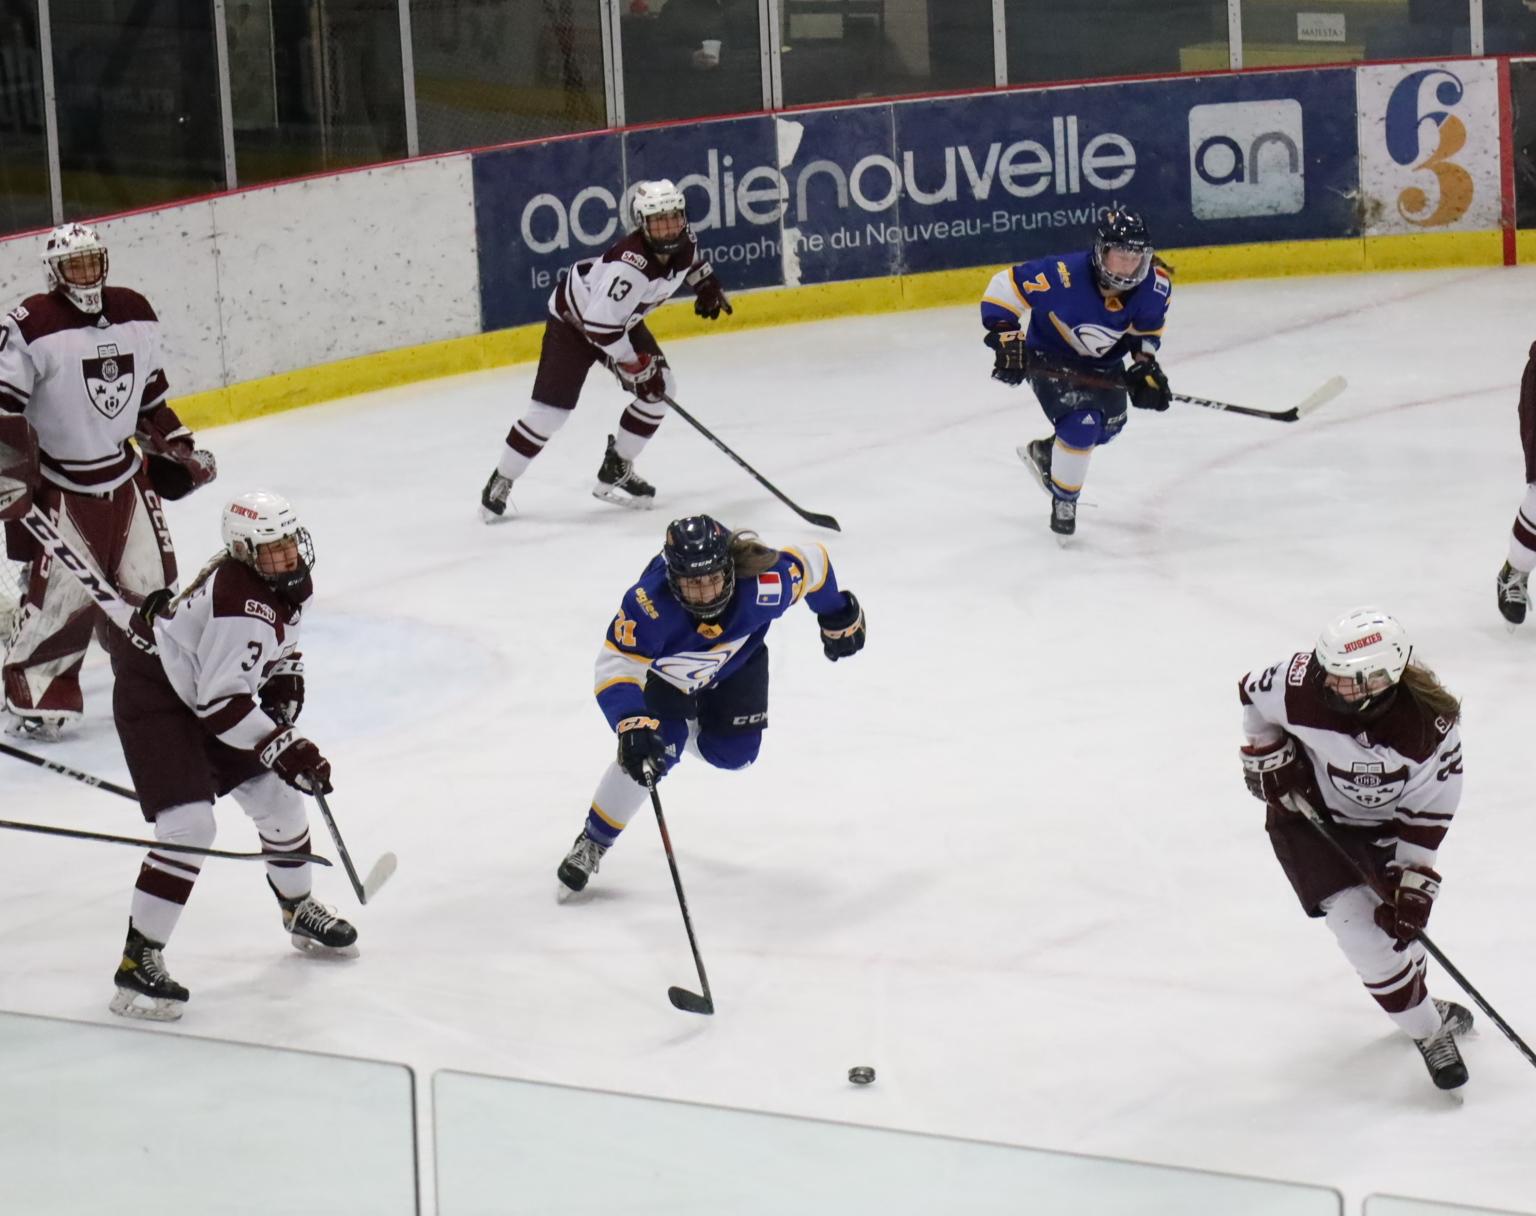 Huskies defeat Aigles Bleues 5-2 for fourth straight win